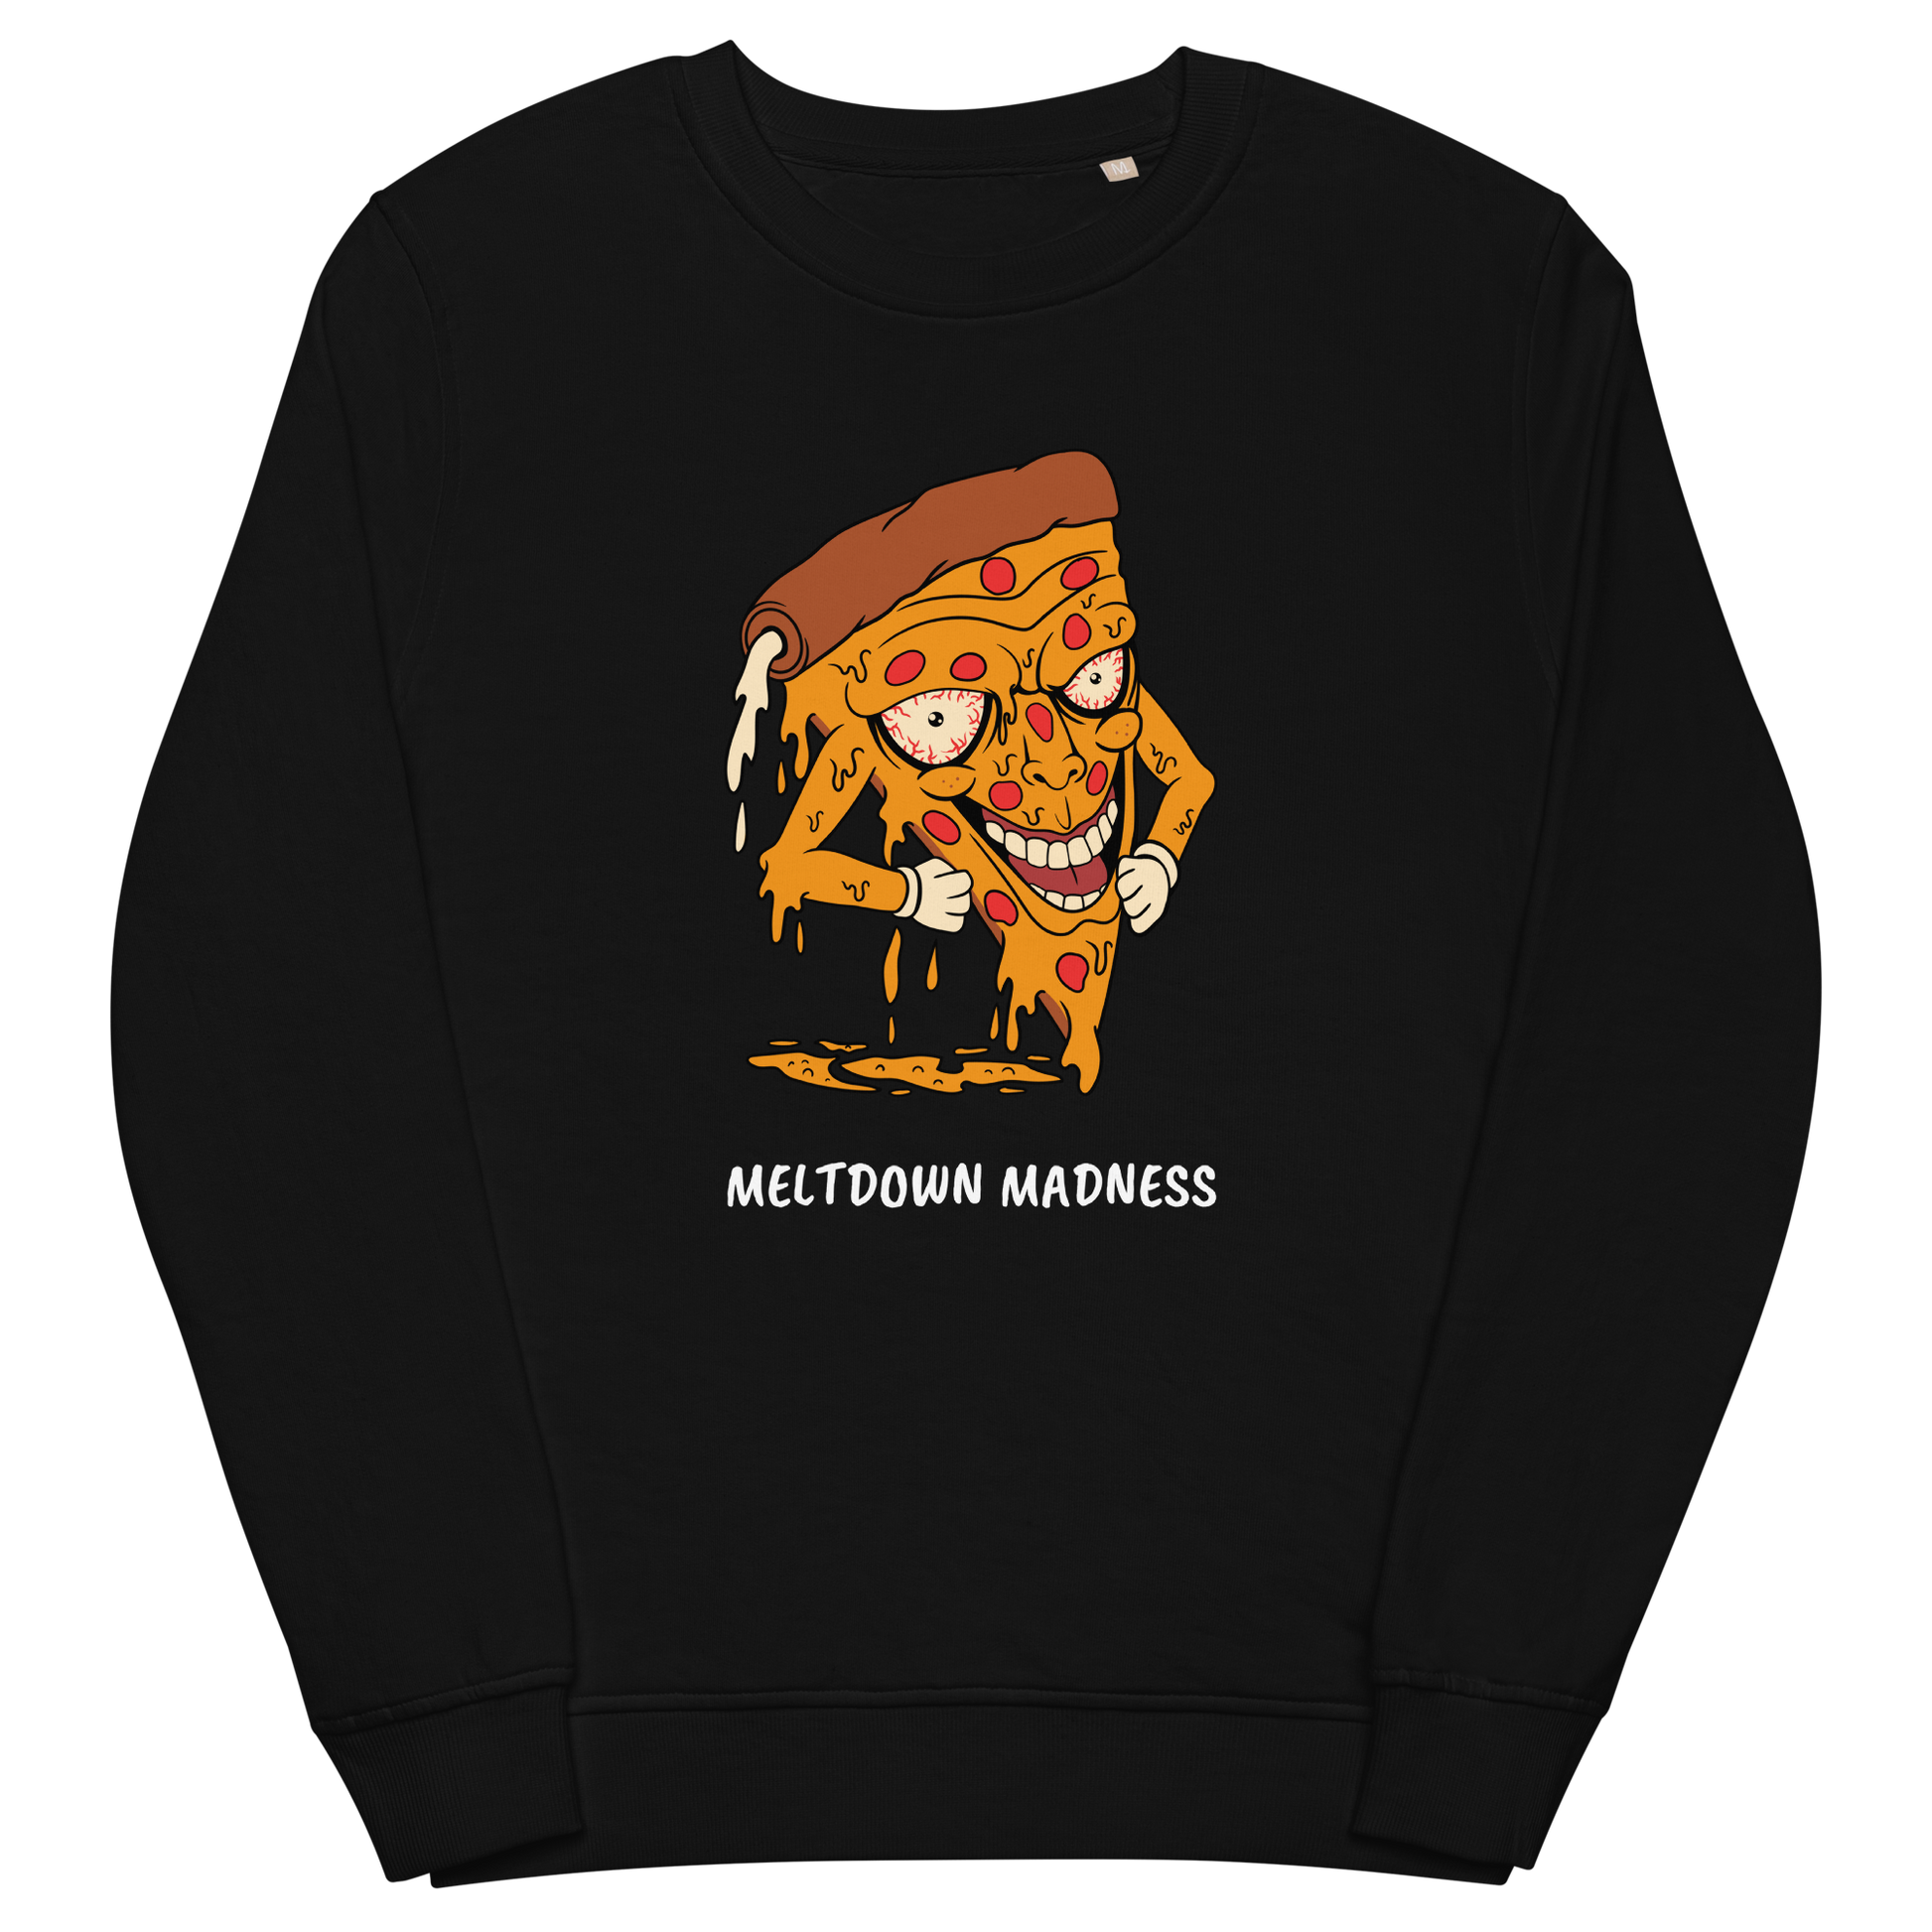 Black Organic Cotton Melting Pizza Sweatshirt featuring a Meltdown Madness graphic on the chest - Funny Graphic Pizza Sweatshirts - Boozy Fox